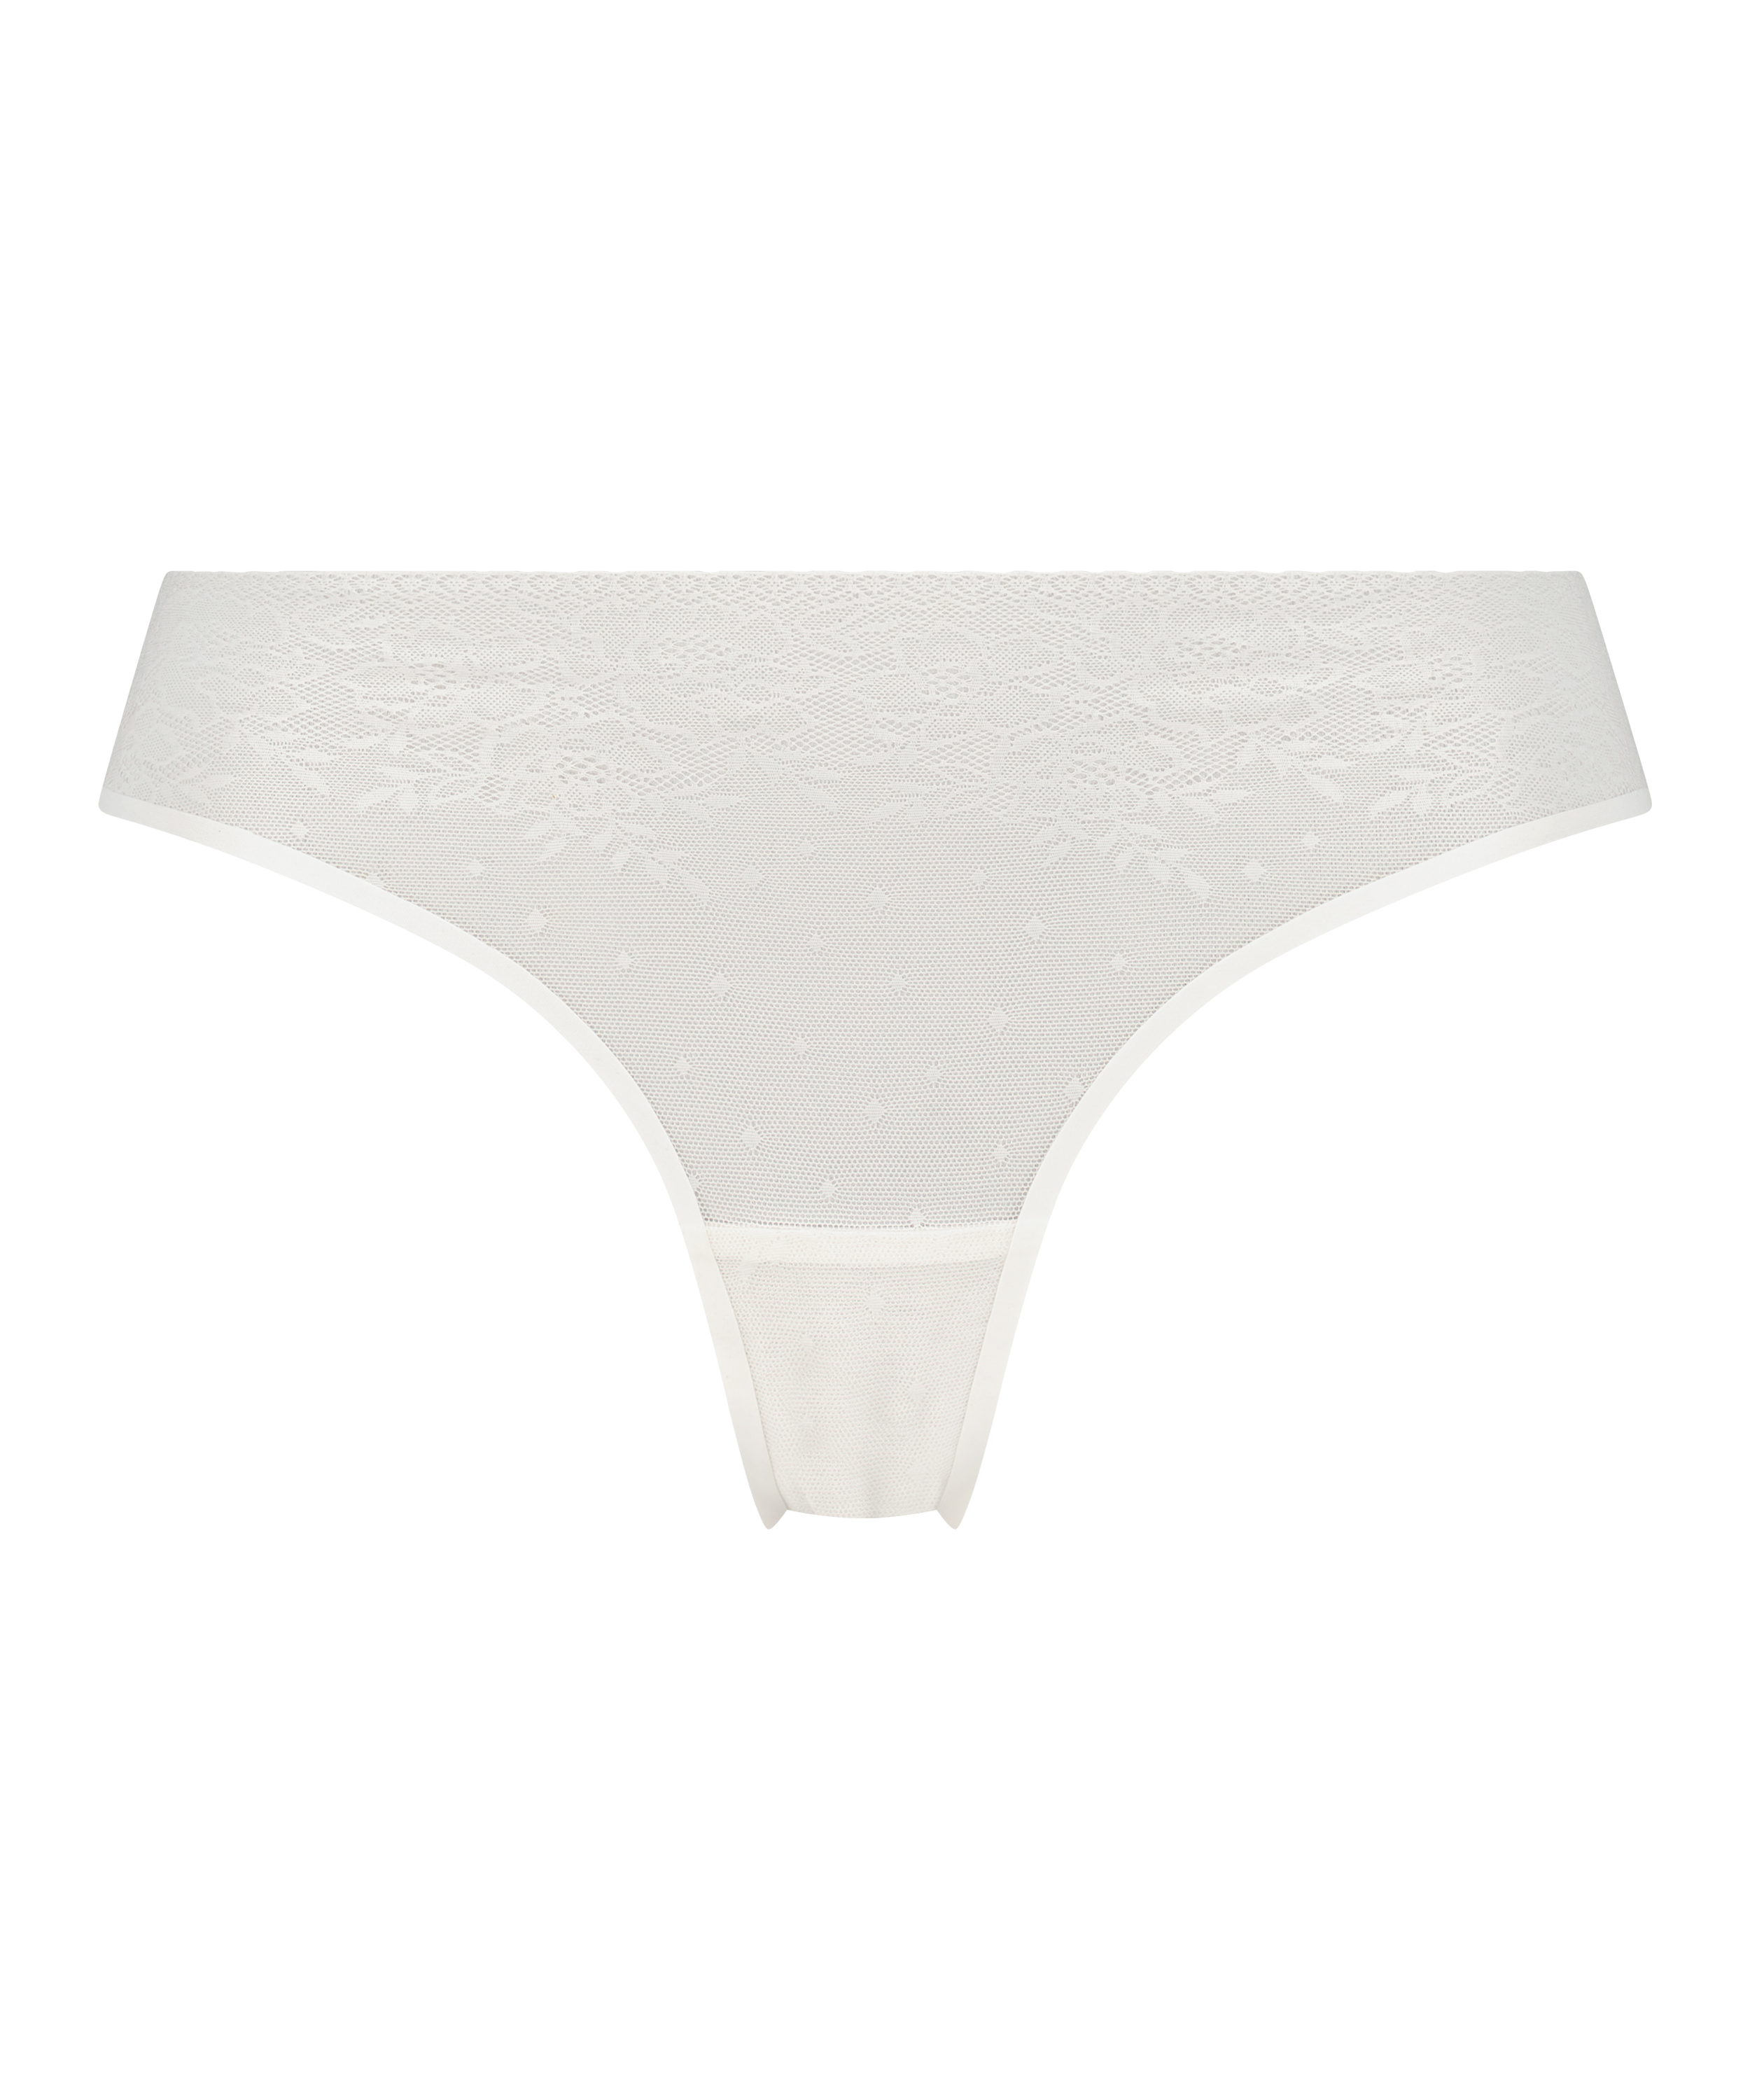 Allover Lace invisible g-streng, Hvit, main